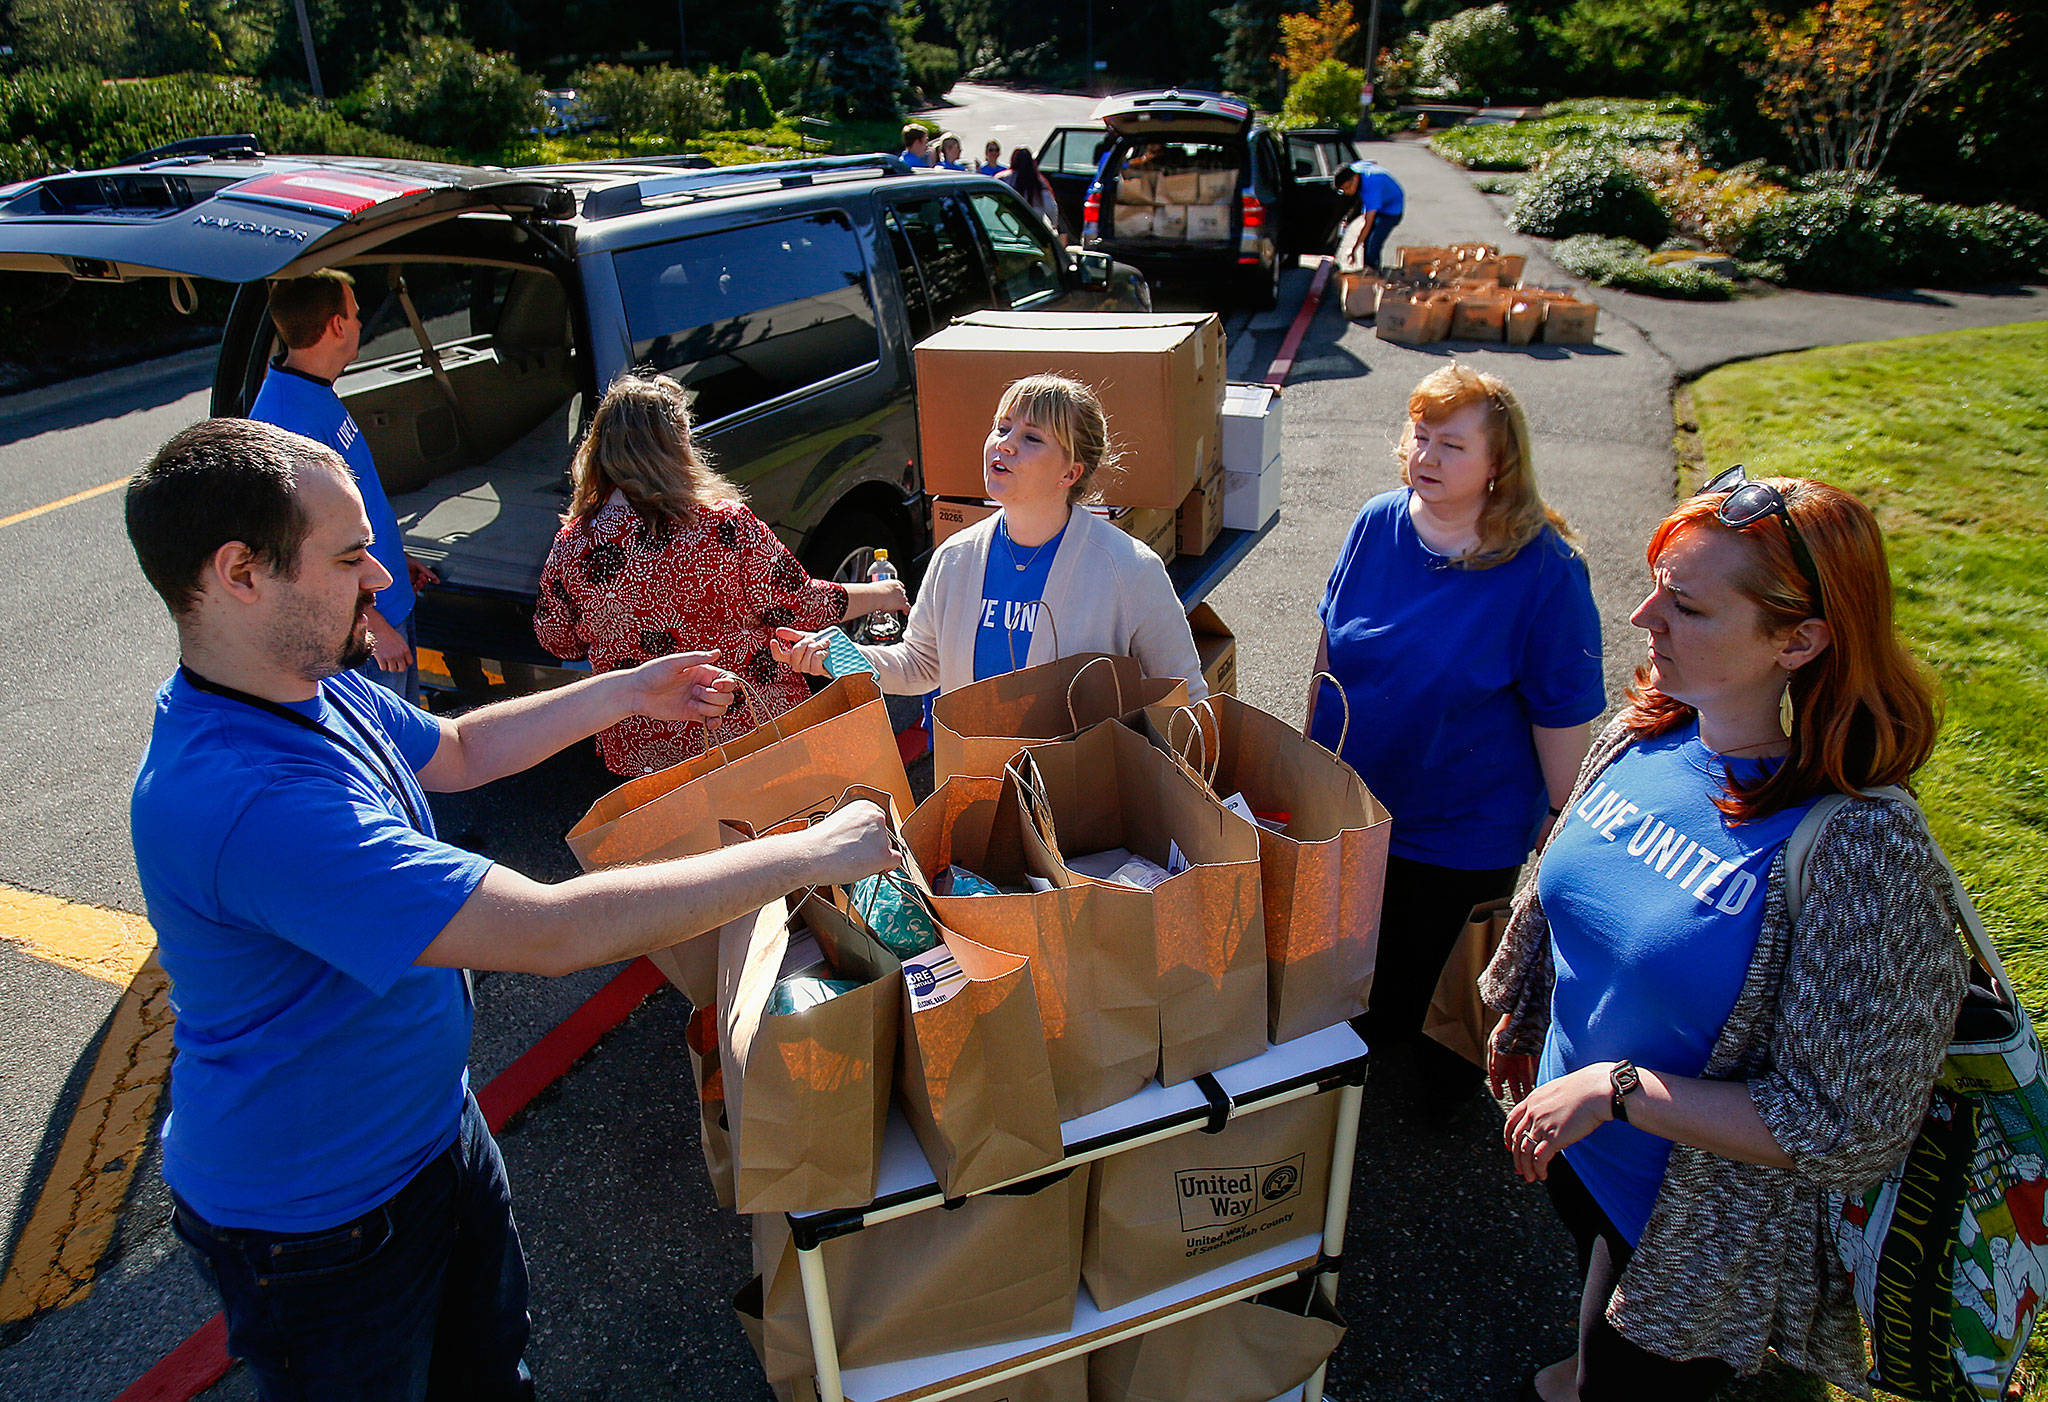 Fluke Corp.’s Susan Israel (center) assists with other Fluke employees including William Nelson (left) and Allyce Barry (right), in efforts to load 260 new-mom kits into vehicles outside the company Friday morning. Workers volunteered with United Way’s Day of Caring. (Dan Bates / The Herald)